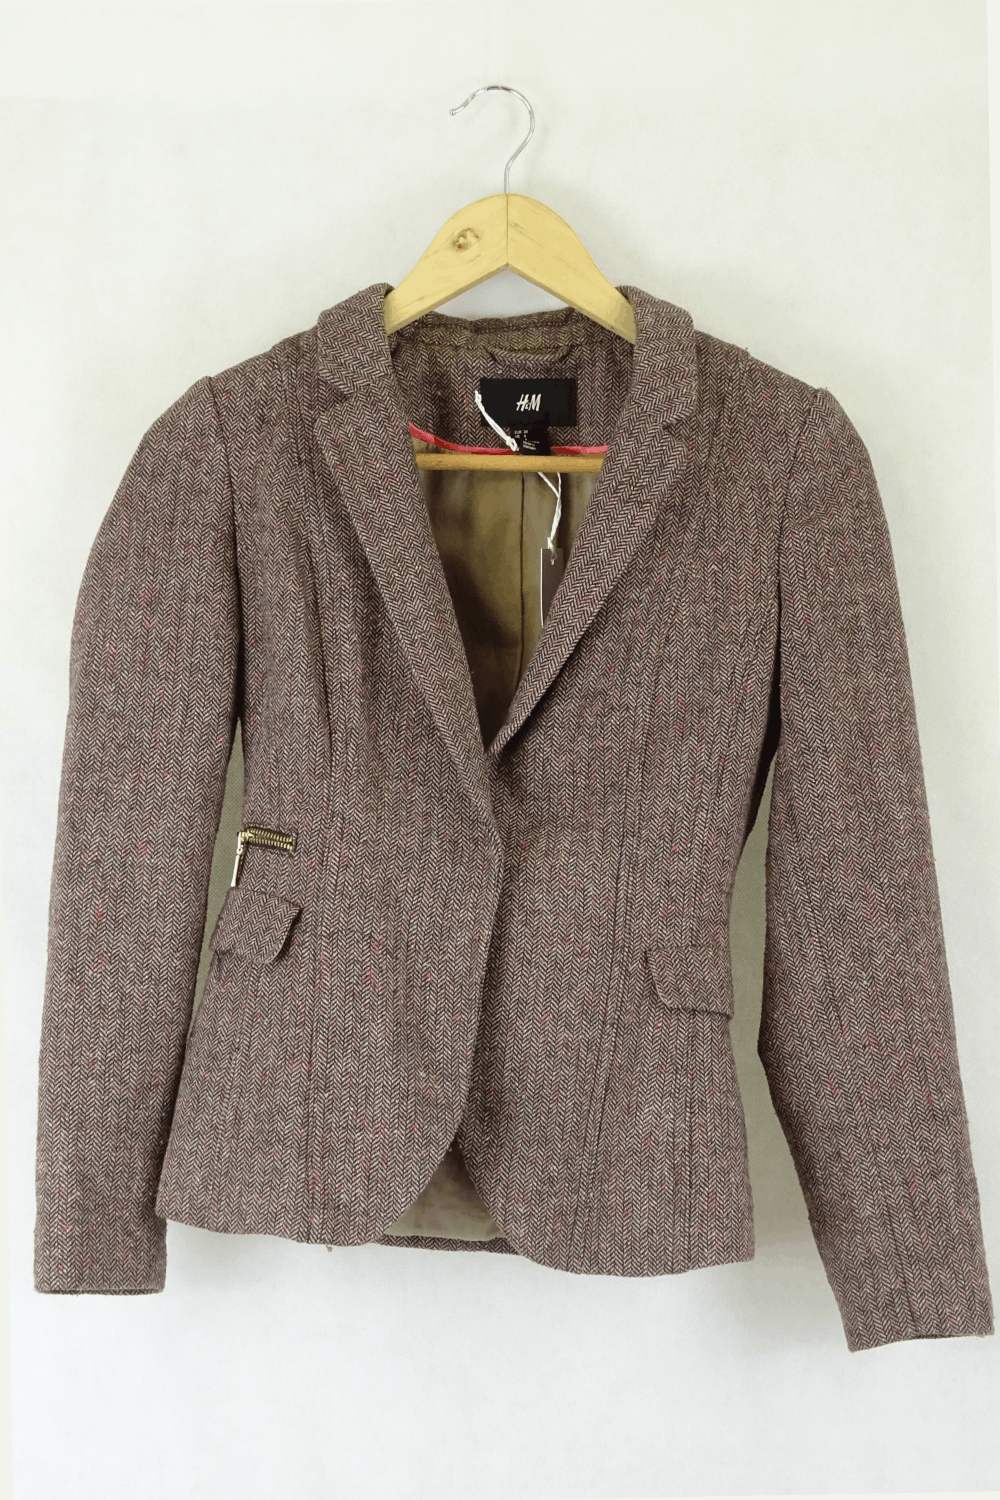 H&amp;M Woven Brown Jacket 4